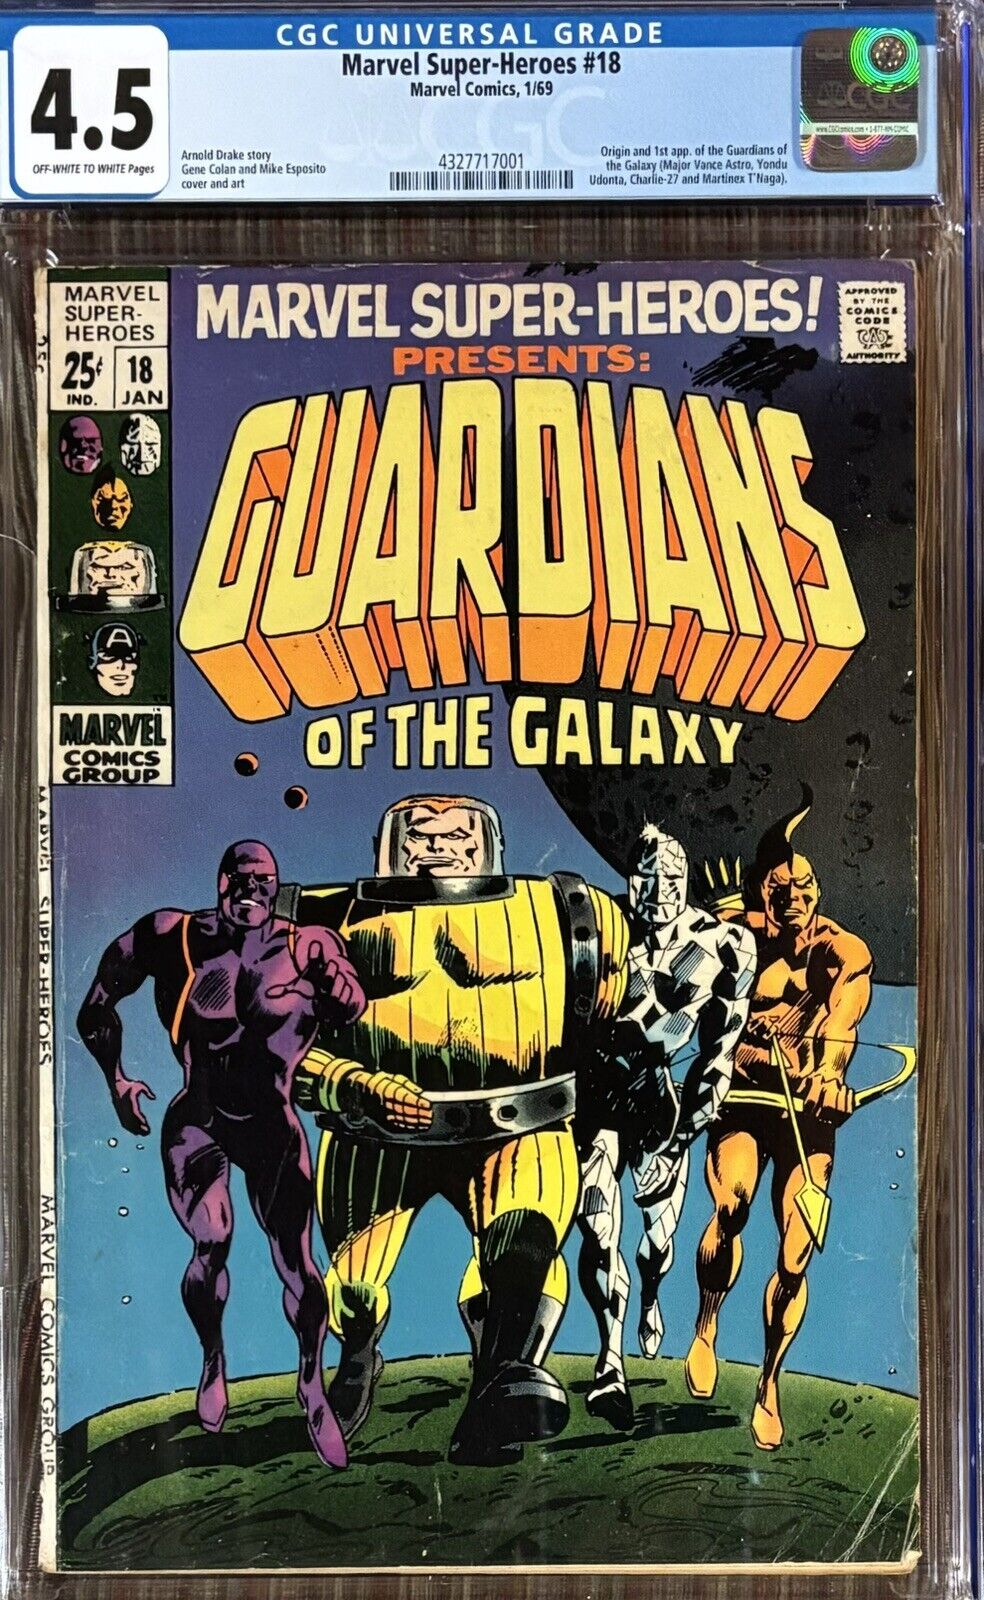 Marvel Super Heroes #18 CGC 4.5 1969 1st app. and origin Guardians of the Galaxy